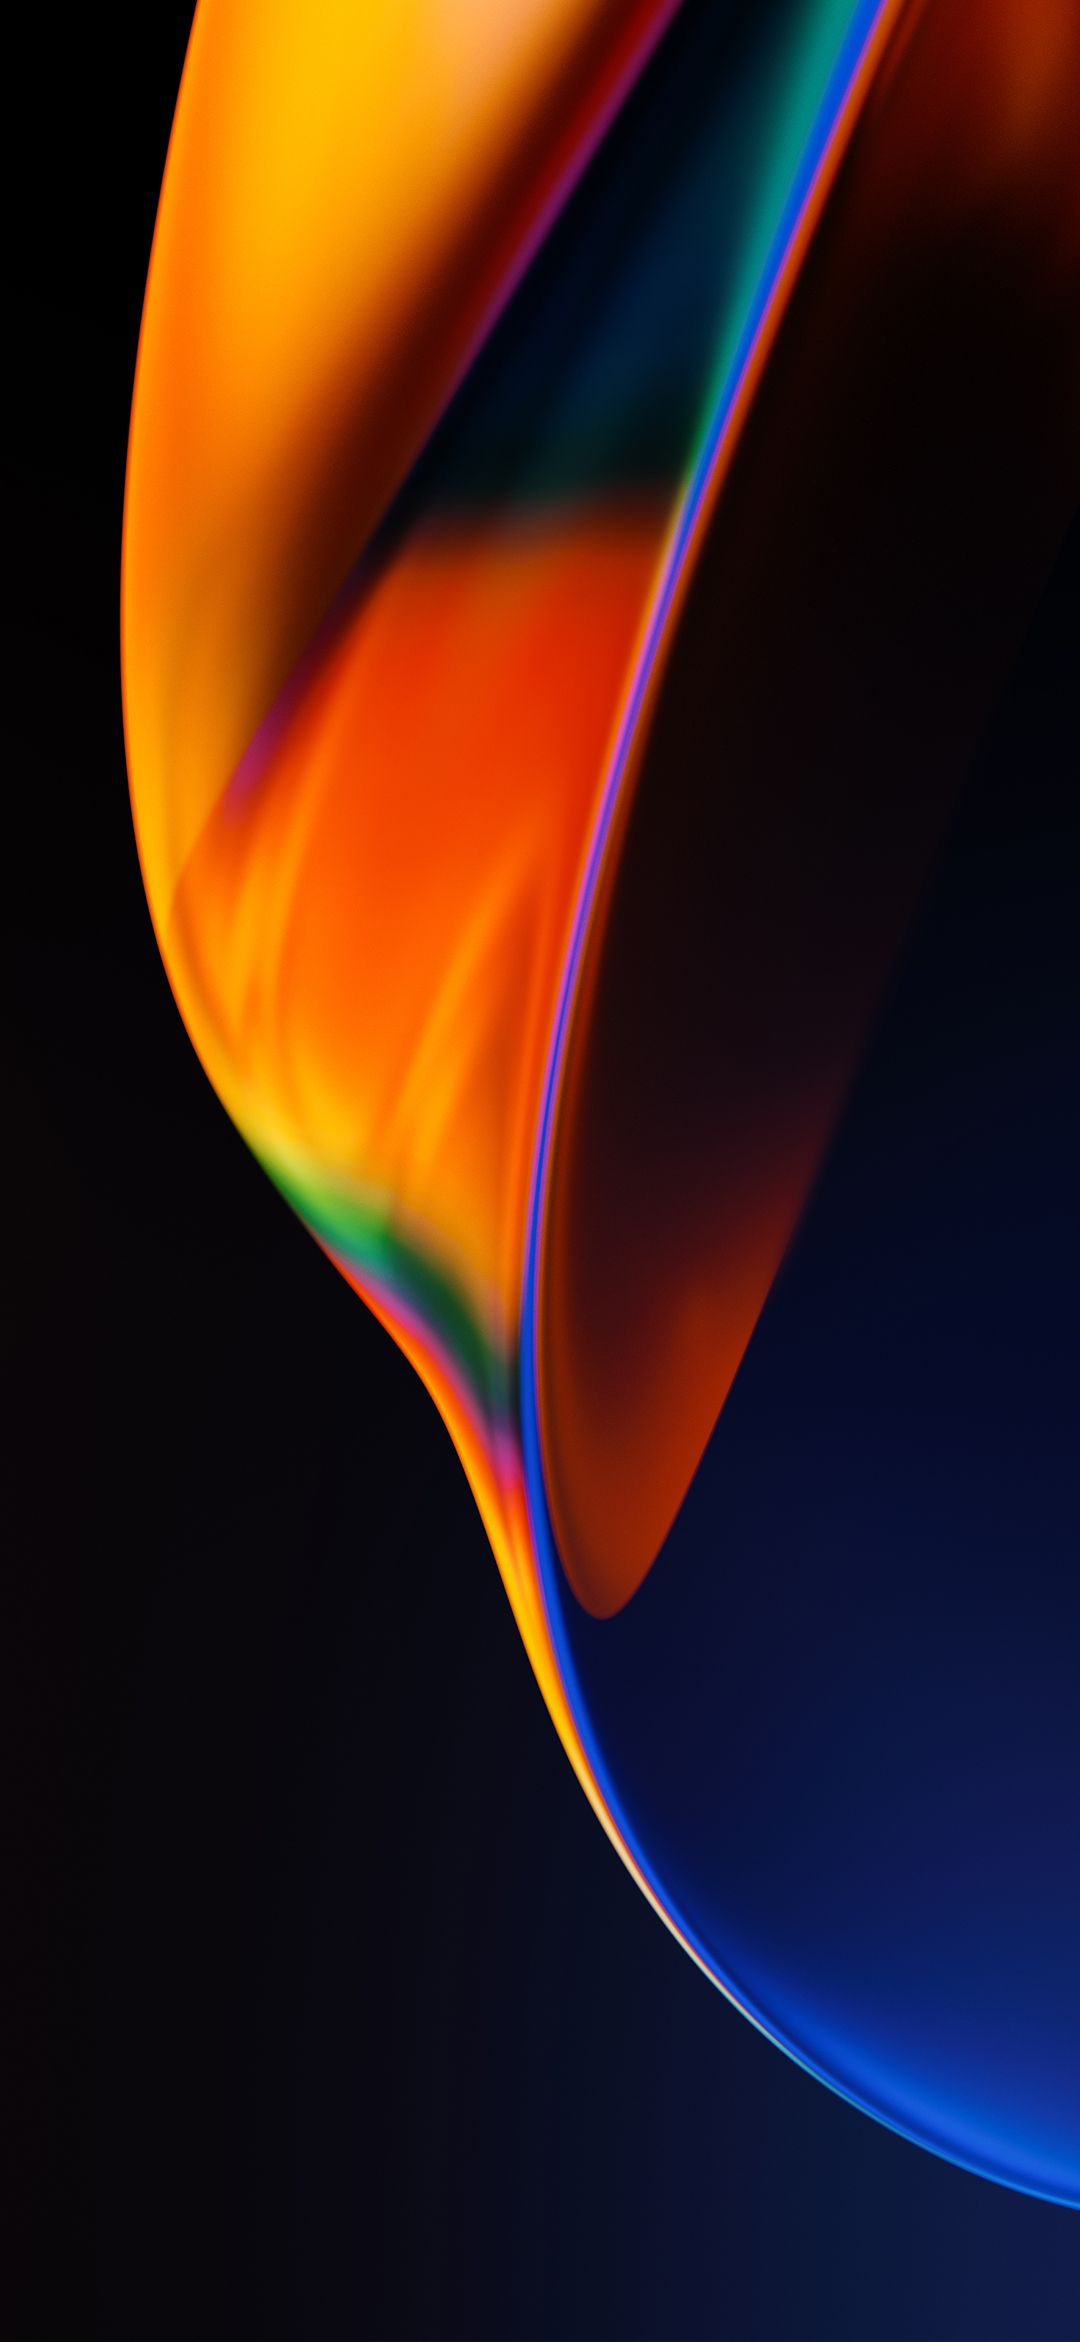 OnePlus TV Wallpaper (YTECHB Exclusive). Abstract iphone wallpaper, Oneplus wallpaper, Galaxy phone wallpaper